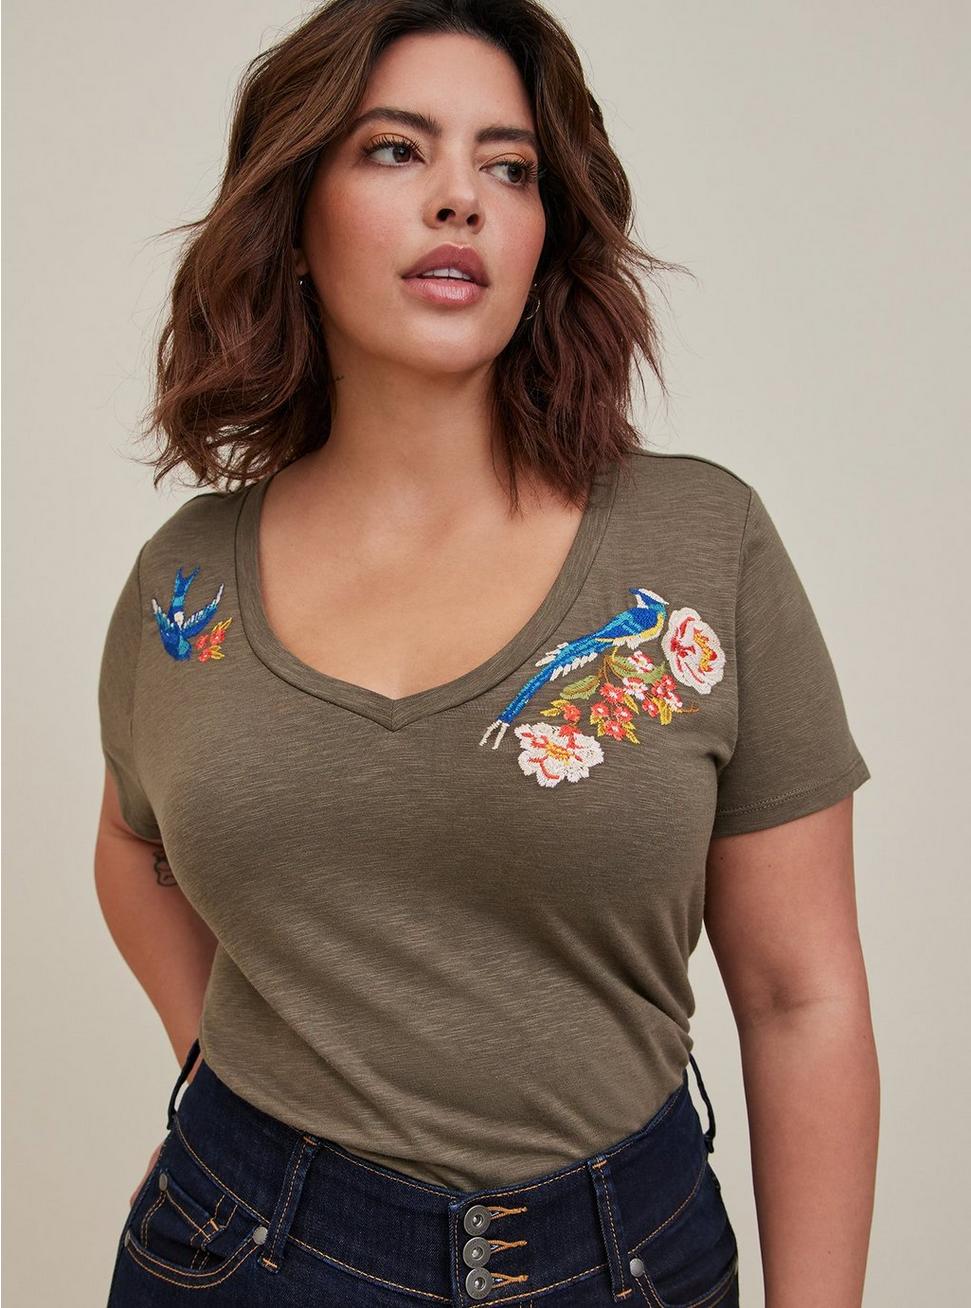 Plus Size Girlfriend Tee - Super Soft Slub Sparrow Embroidery Dusty Olive, DUSTY OLIVE, hi-res